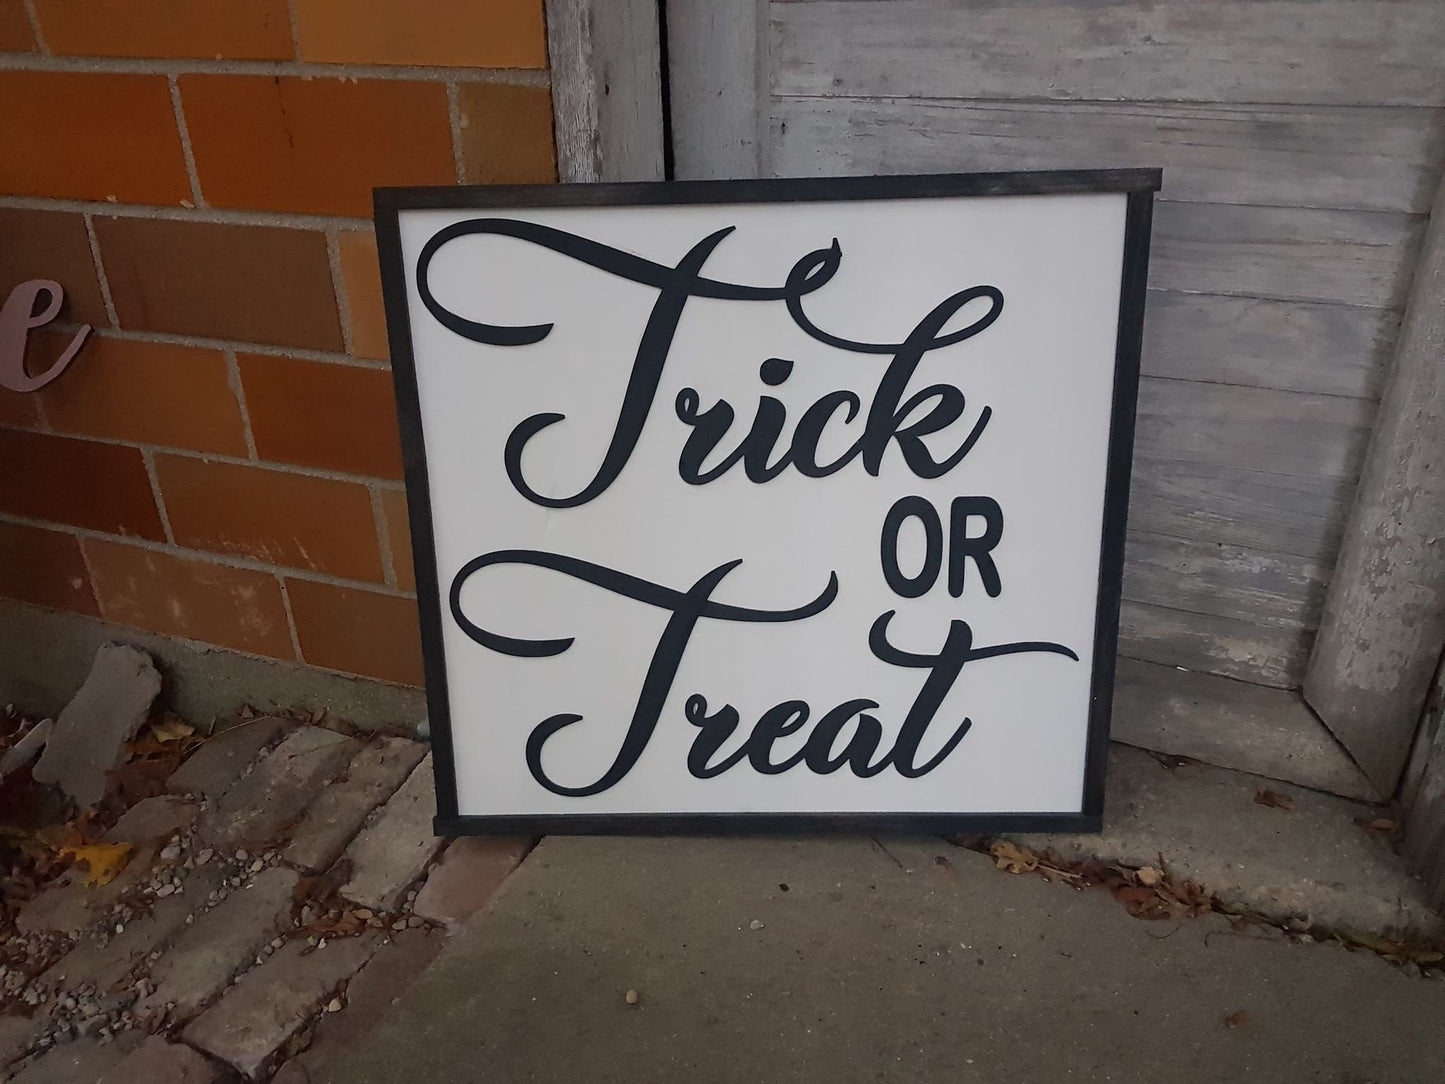 Extra Large Trick or Treat, Halloween, Large, Decor, Large Wood Sign, Over Sized, Raised Text, Sign, Shabby Chic, Rustic, 3D